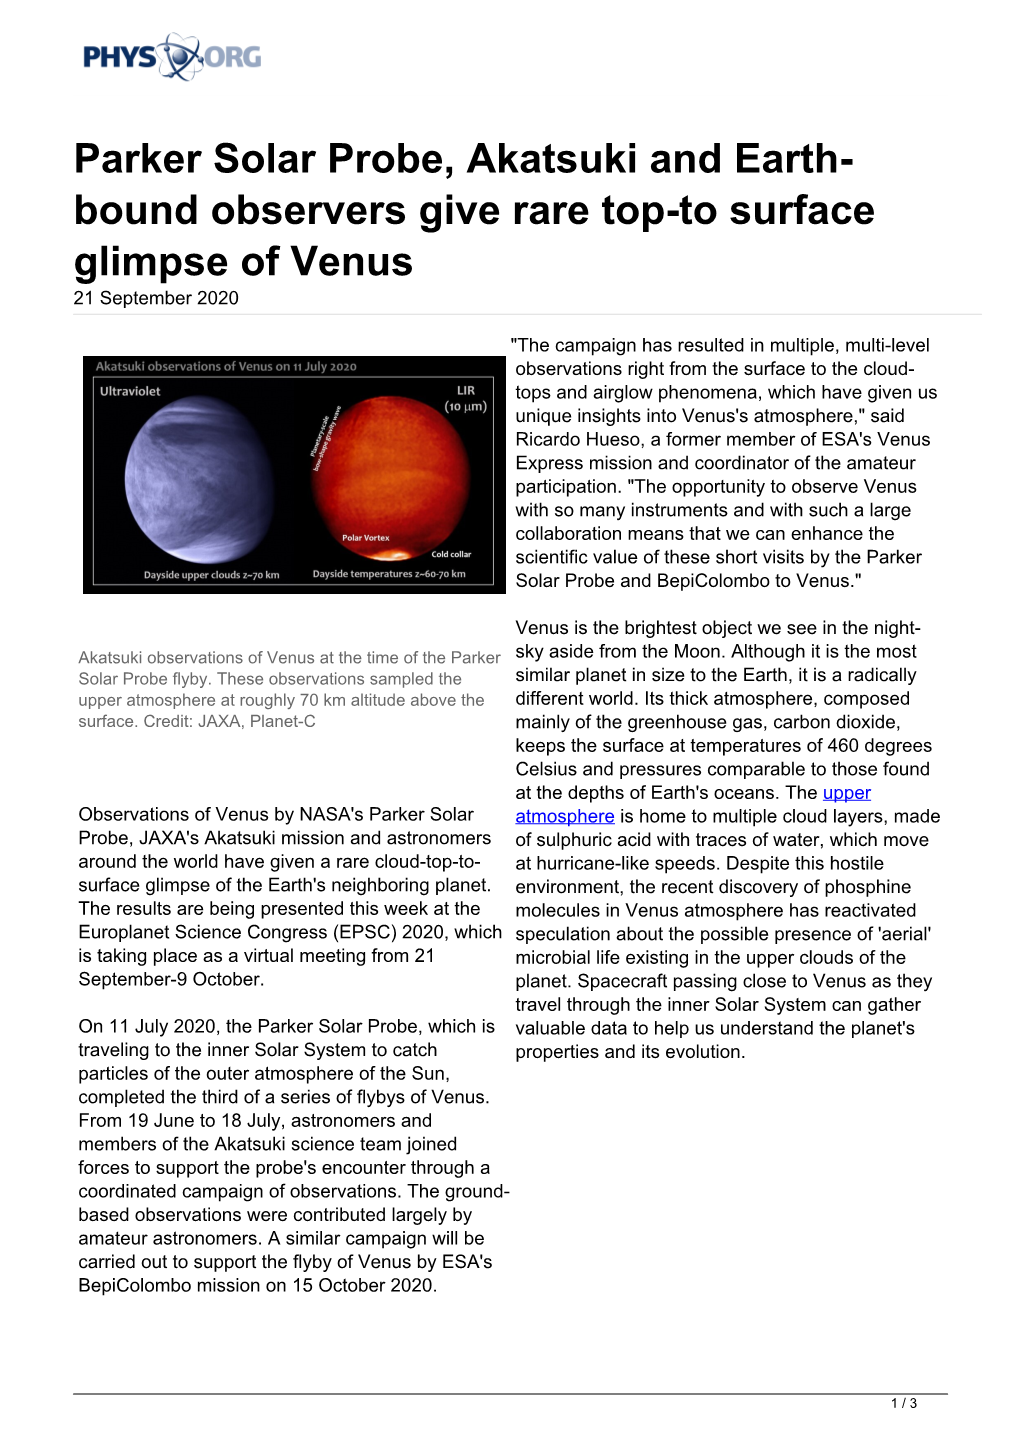 Parker Solar Probe, Akatsuki and Earth-Bound Observers Give Rare Top-To Surface Glimpse of Venus